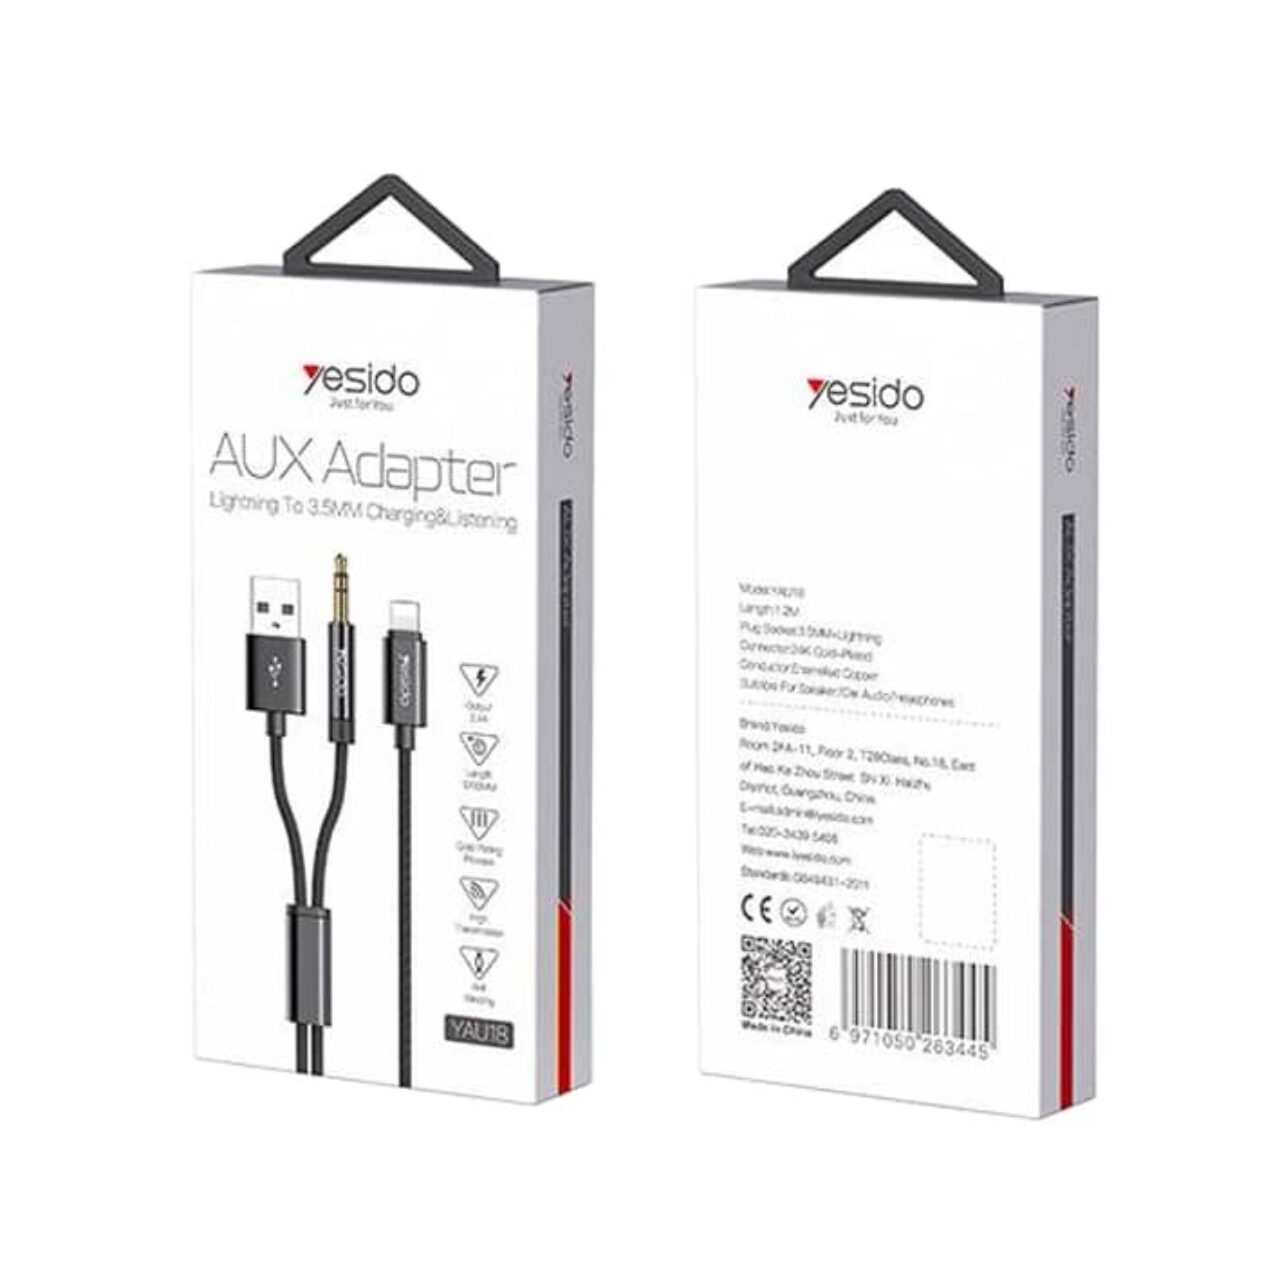 Yesido Lightning to 3 5mm Audio Cable AUX Adapter YAU18